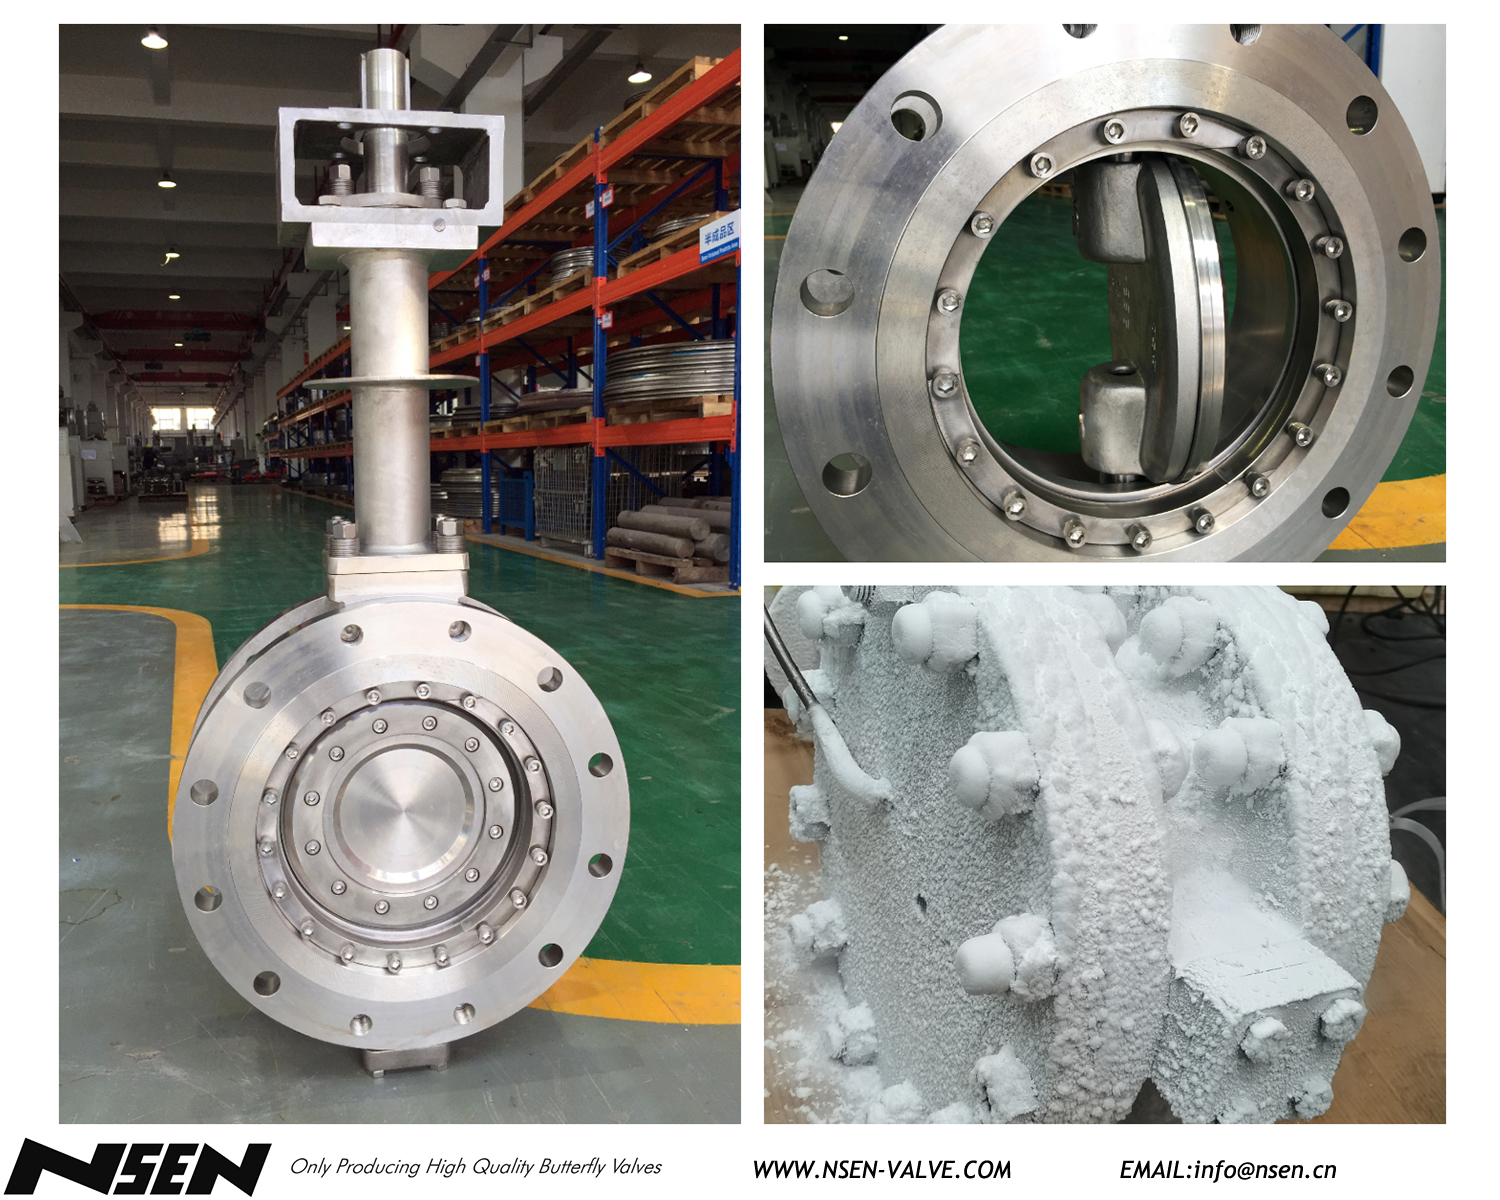 Cryogenic butterfly valve NSEN New product